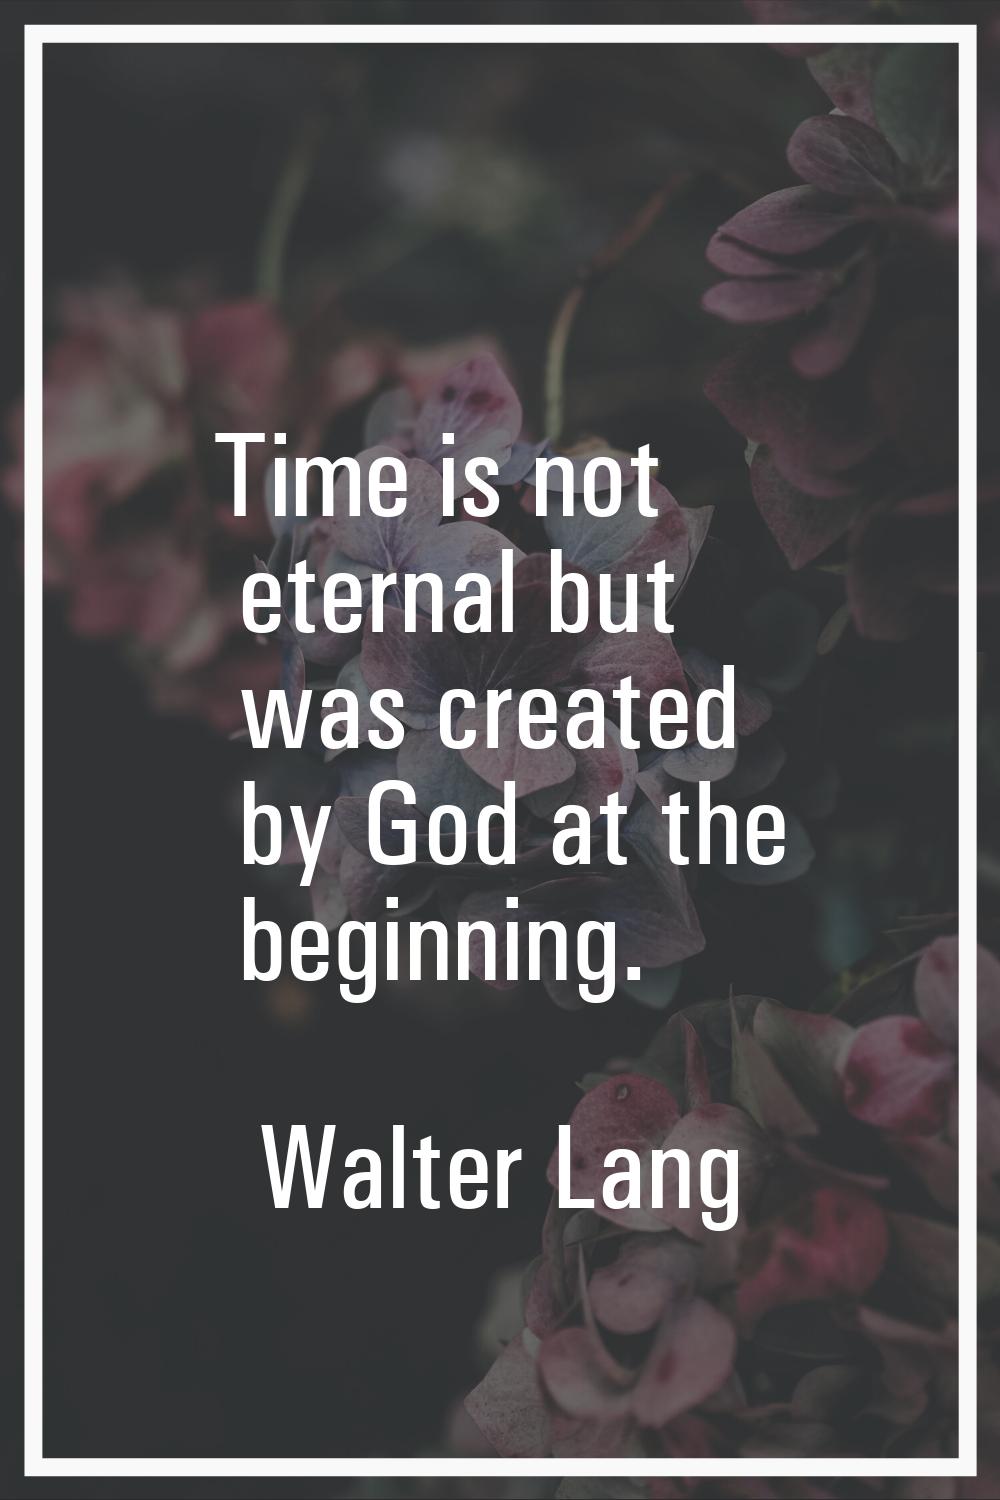 Time is not eternal but was created by God at the beginning.